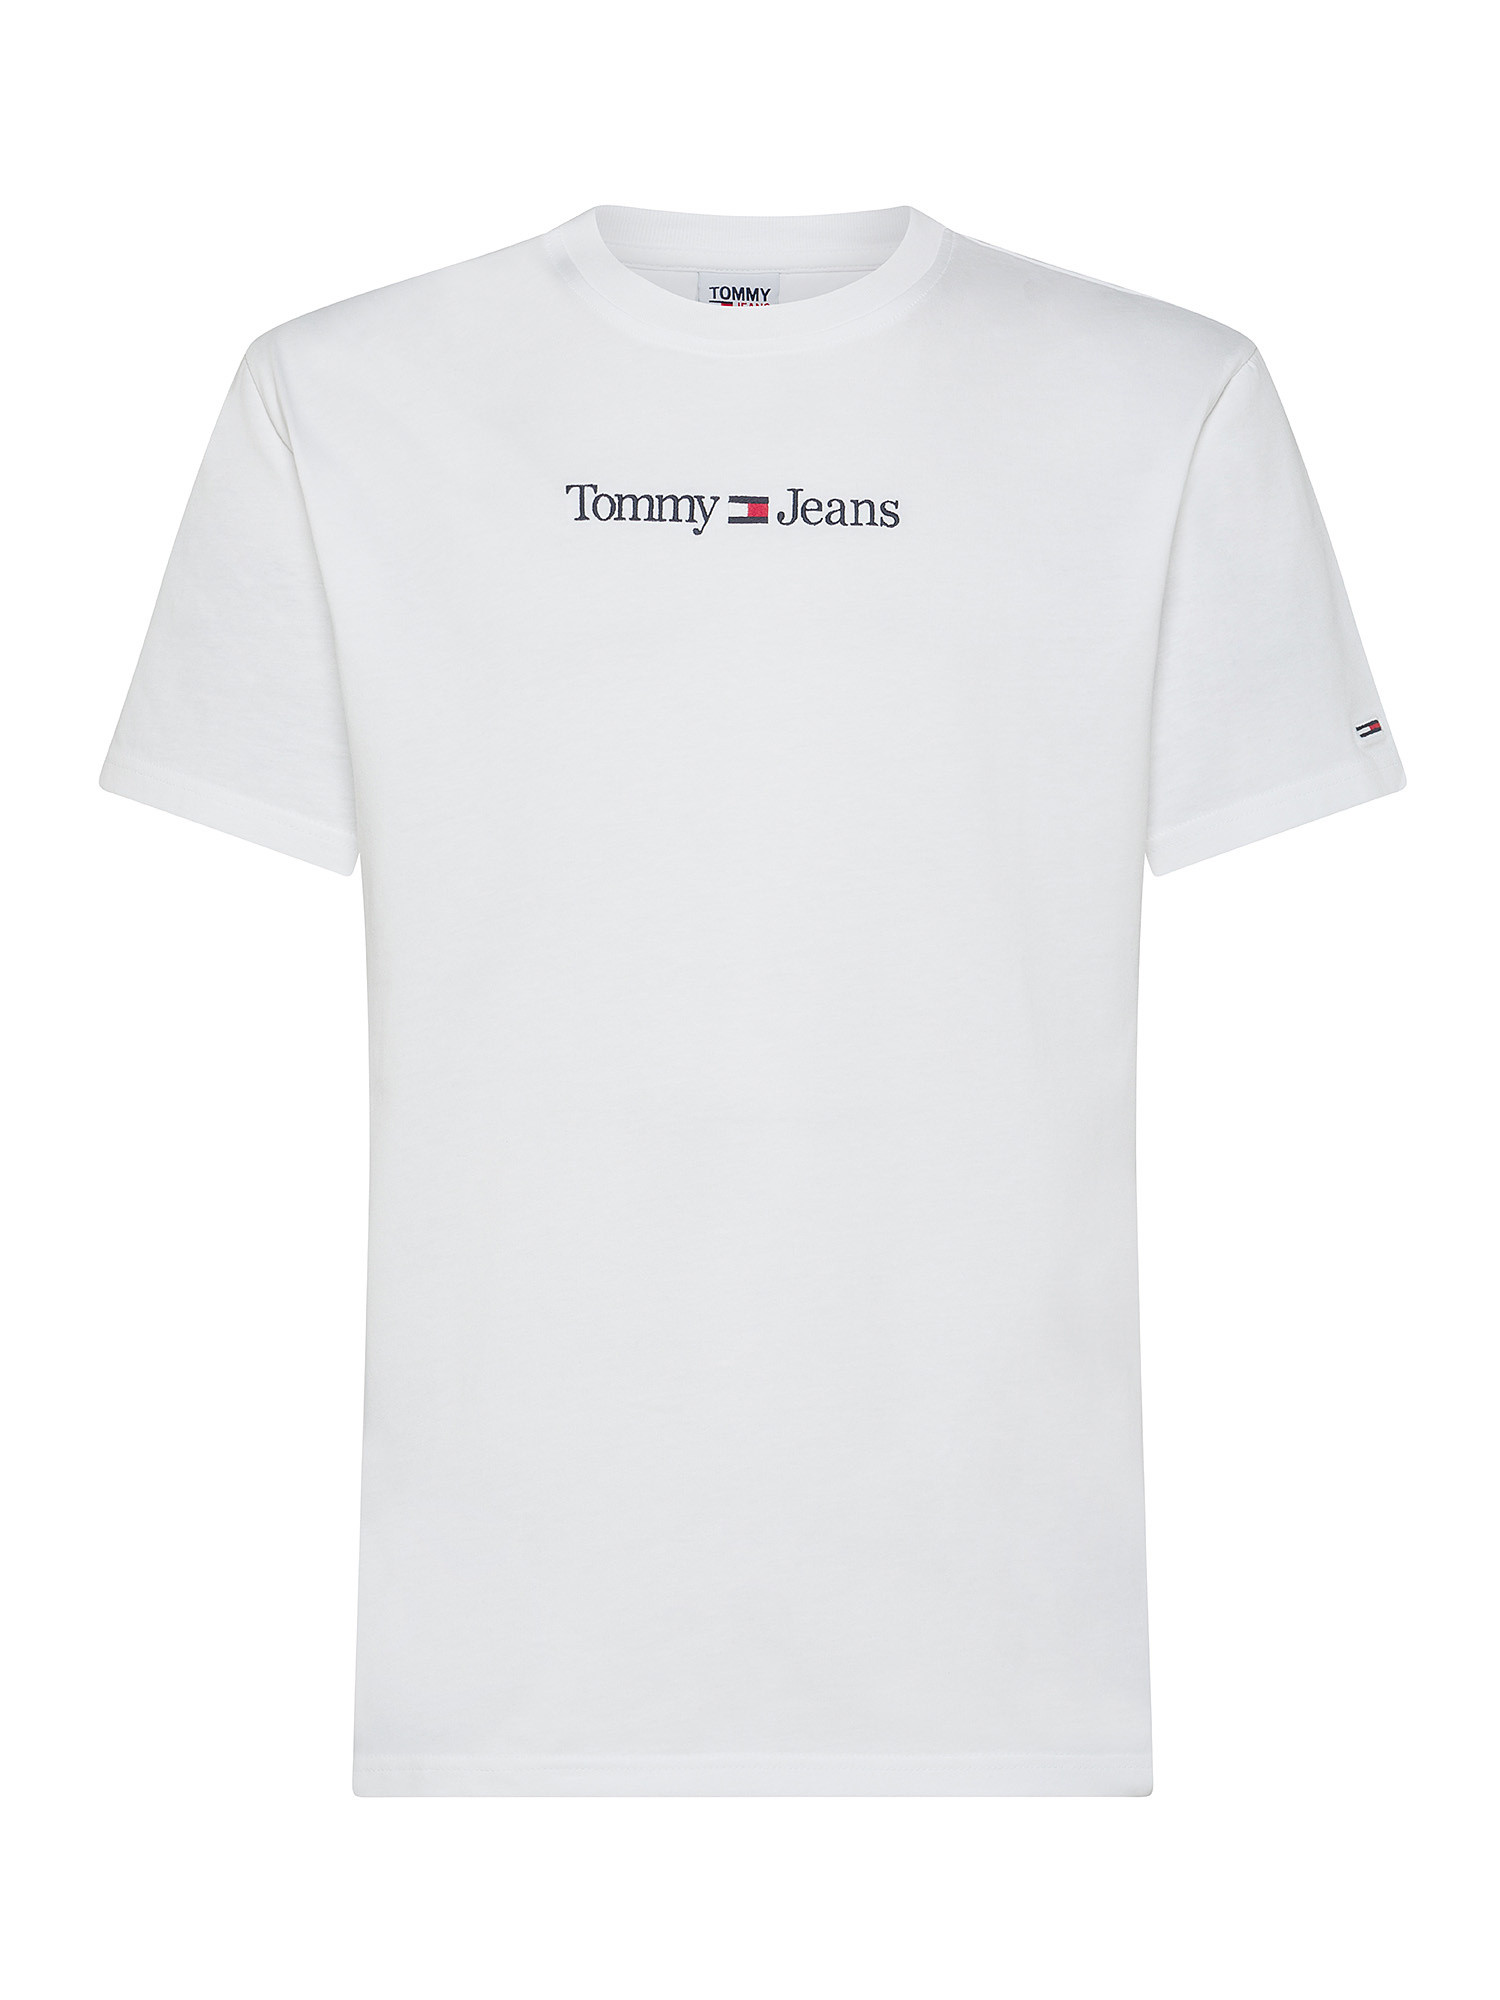 Tommy Jeans - Crew neck cotton T-shirt with embroidered logo, White, large image number 0